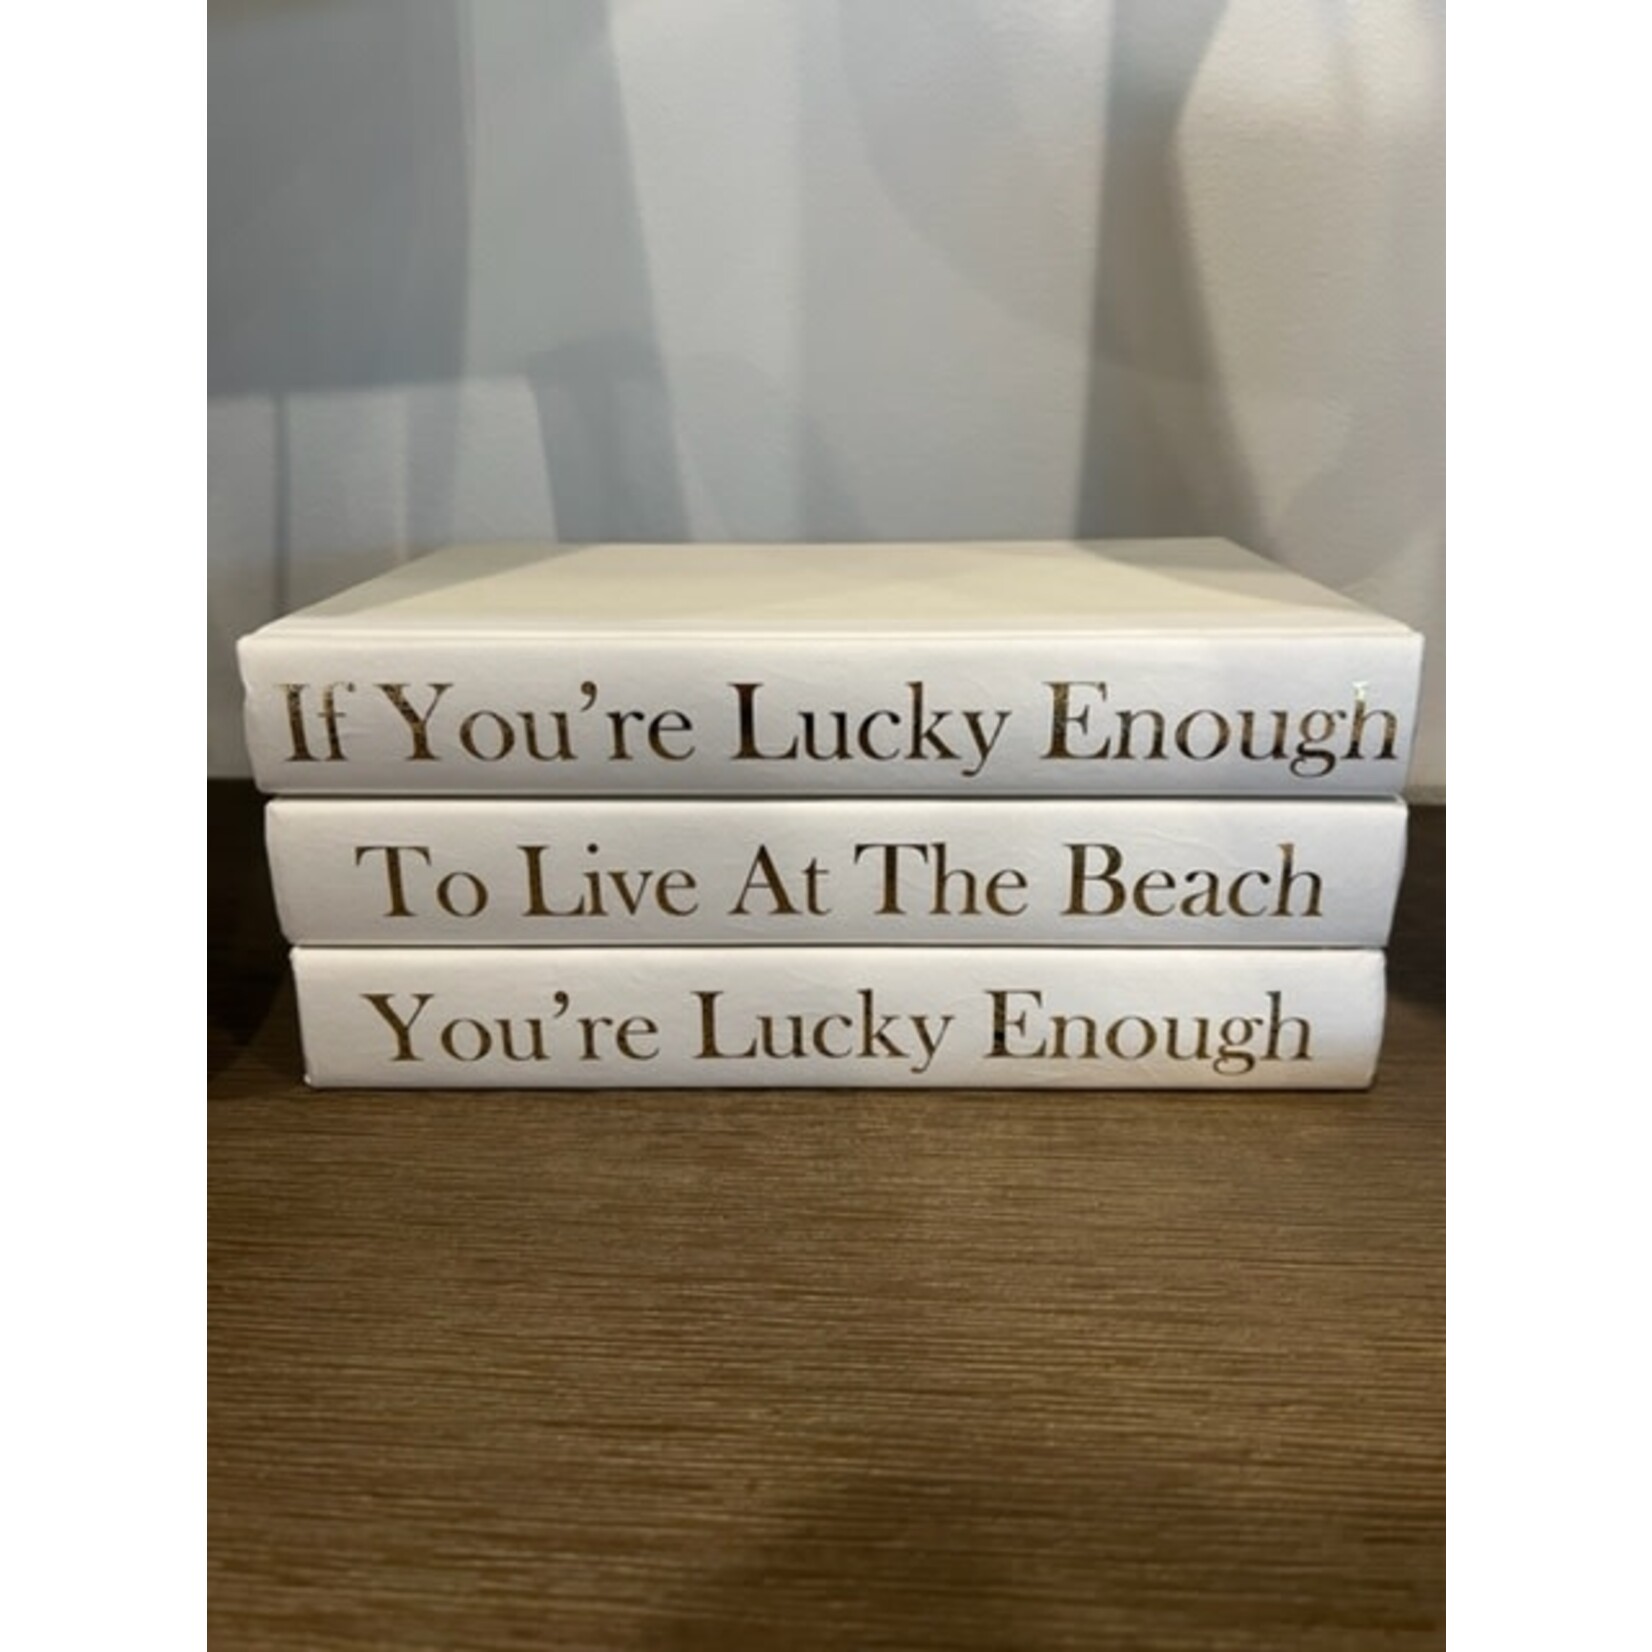 Mickler & Co. "If You're Lucky Enough To Live At The Beach" Decorative Book Stack